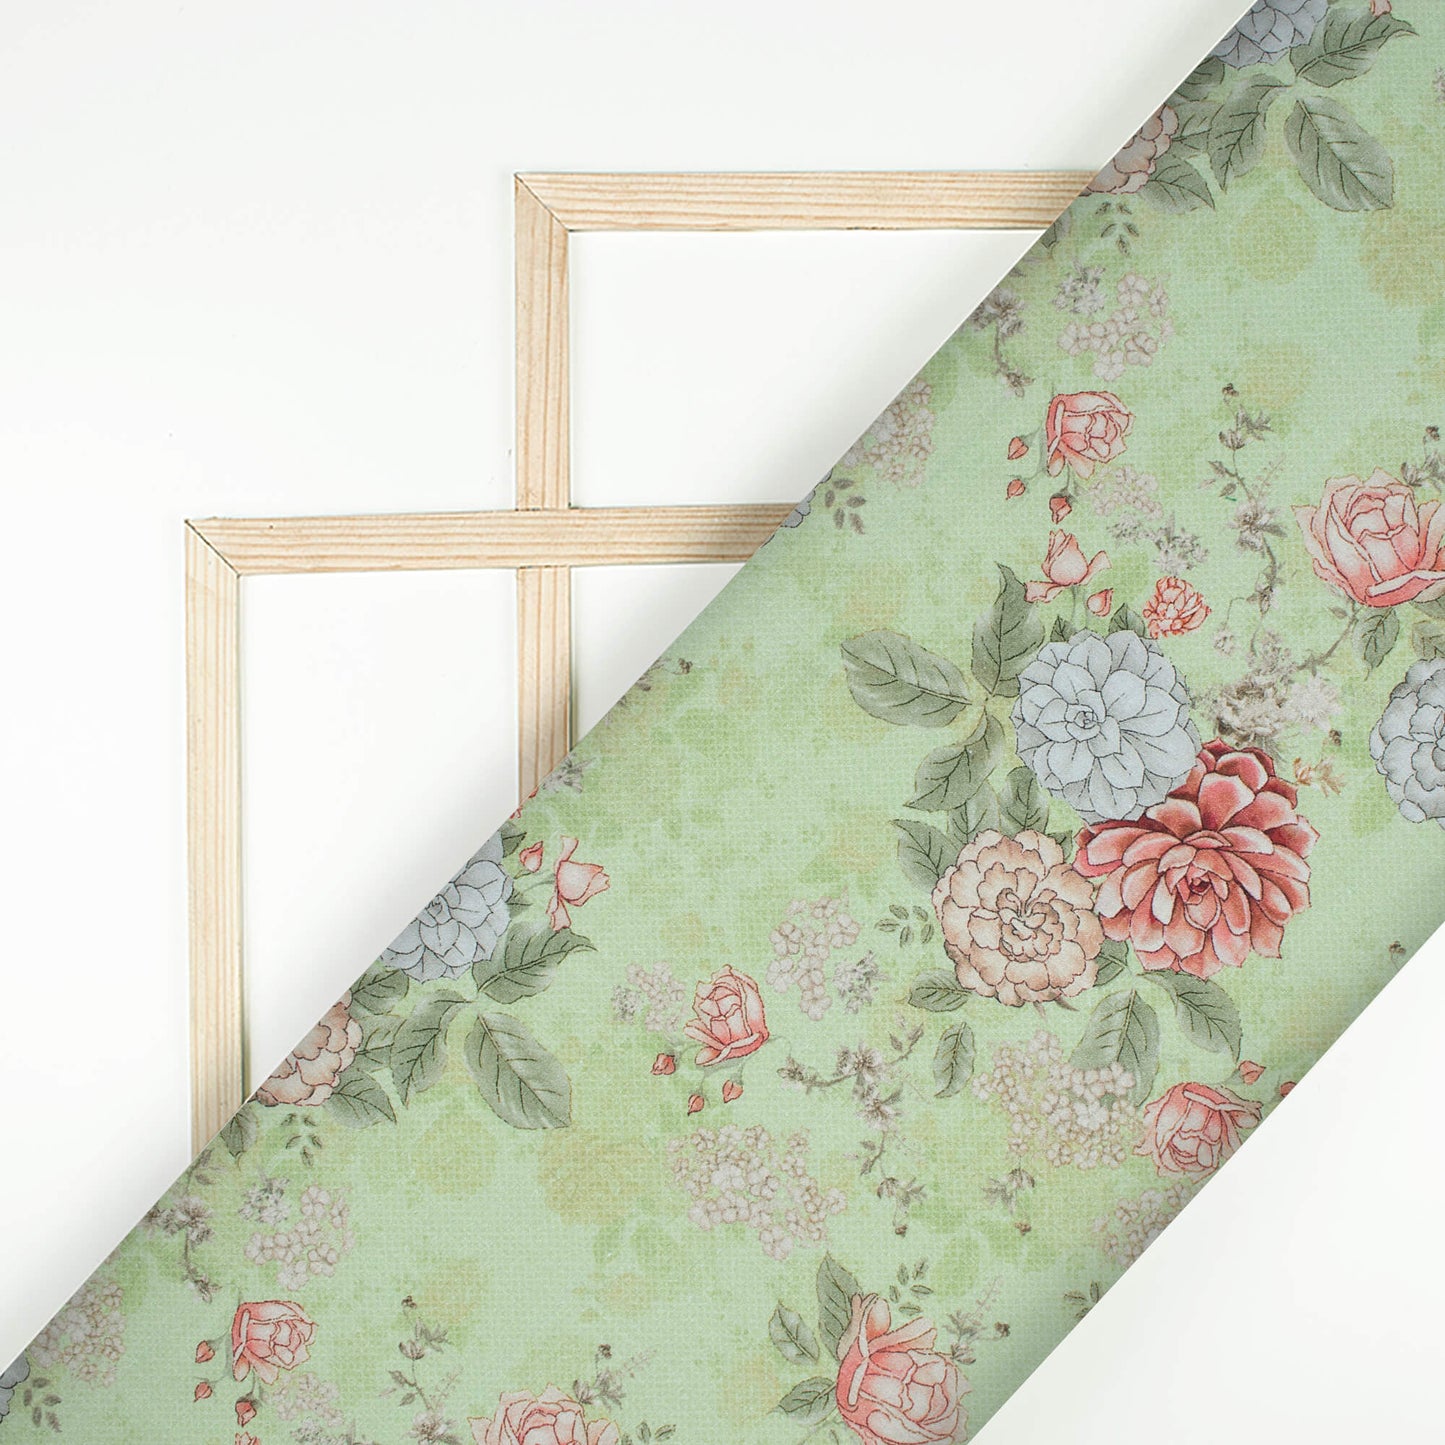 Pistachio Green And Grey Floral  Pattern Digital Print Cotton Cambric Fabric